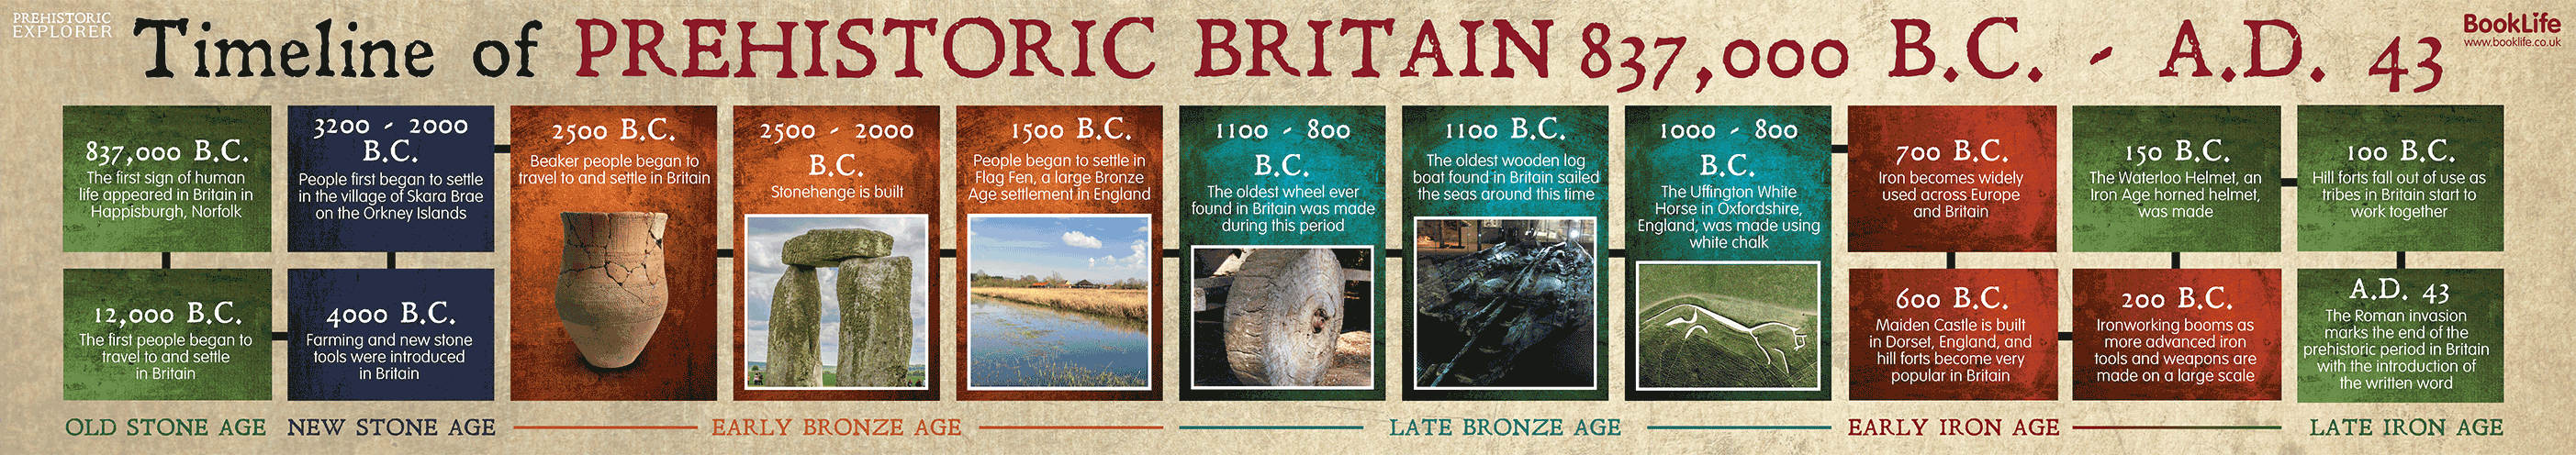 Timeline of Prehistoric Britain Poster by BookLife